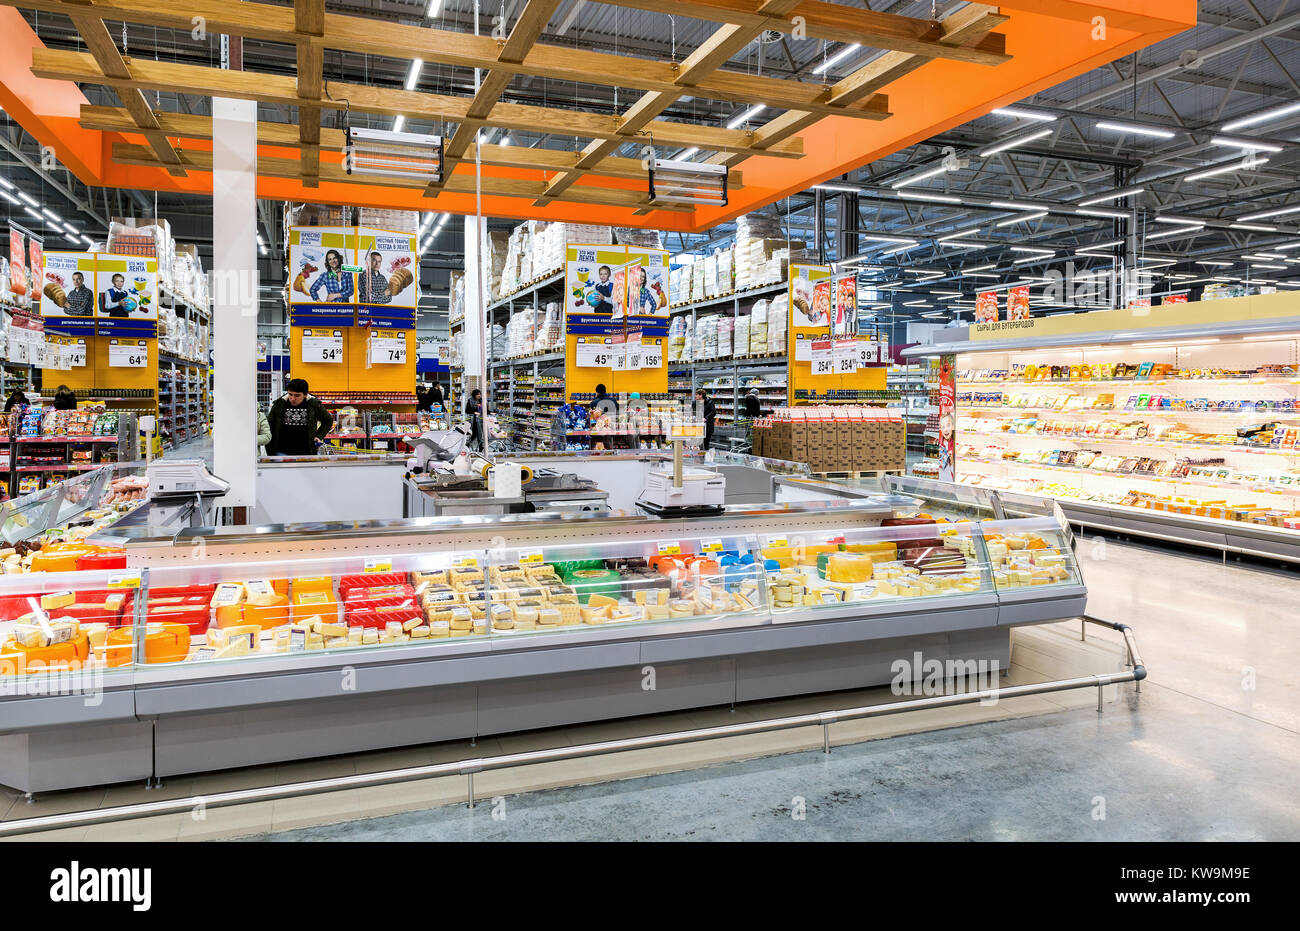 Samara, Russia - December 15, 2017: Interior of the hypermarket Lenta. One of largest food retailer in Russia Stock Photo